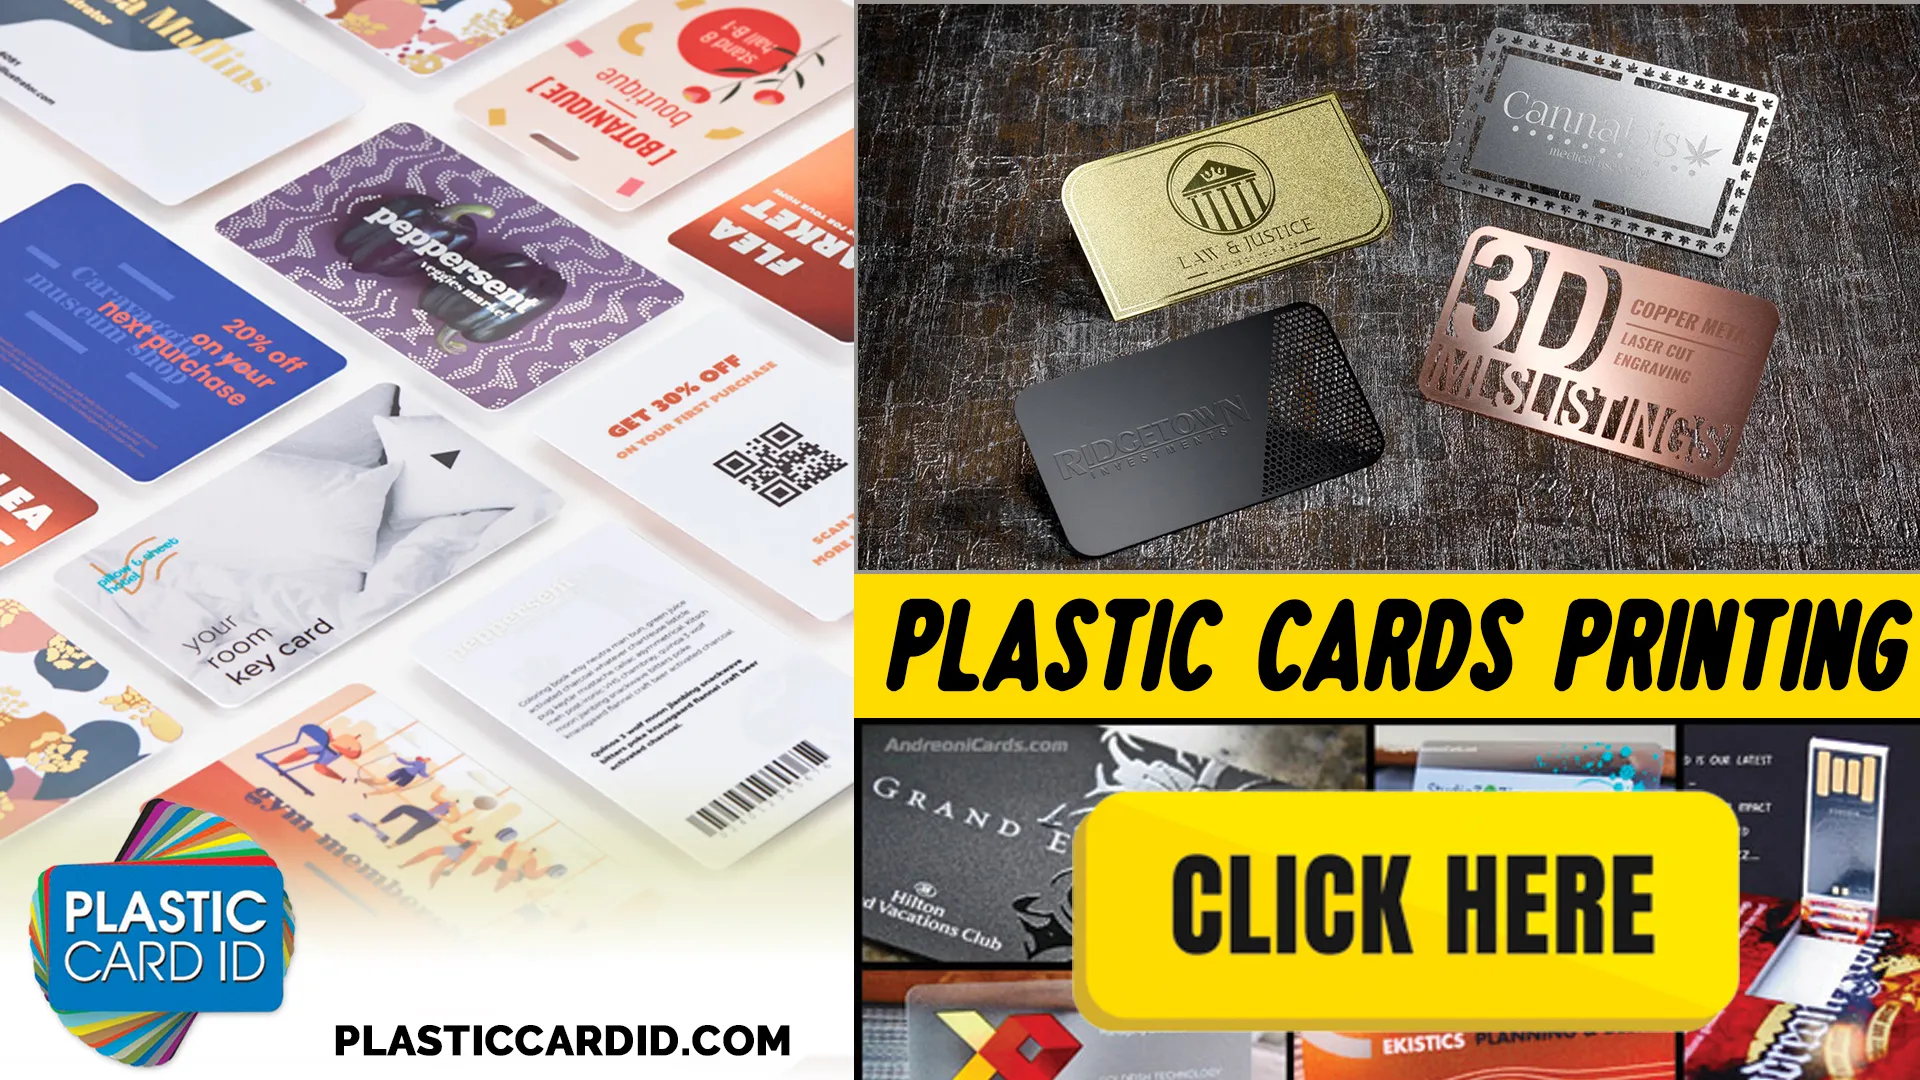 The Technology Behind Our Eco-Friendly Plastic Cards